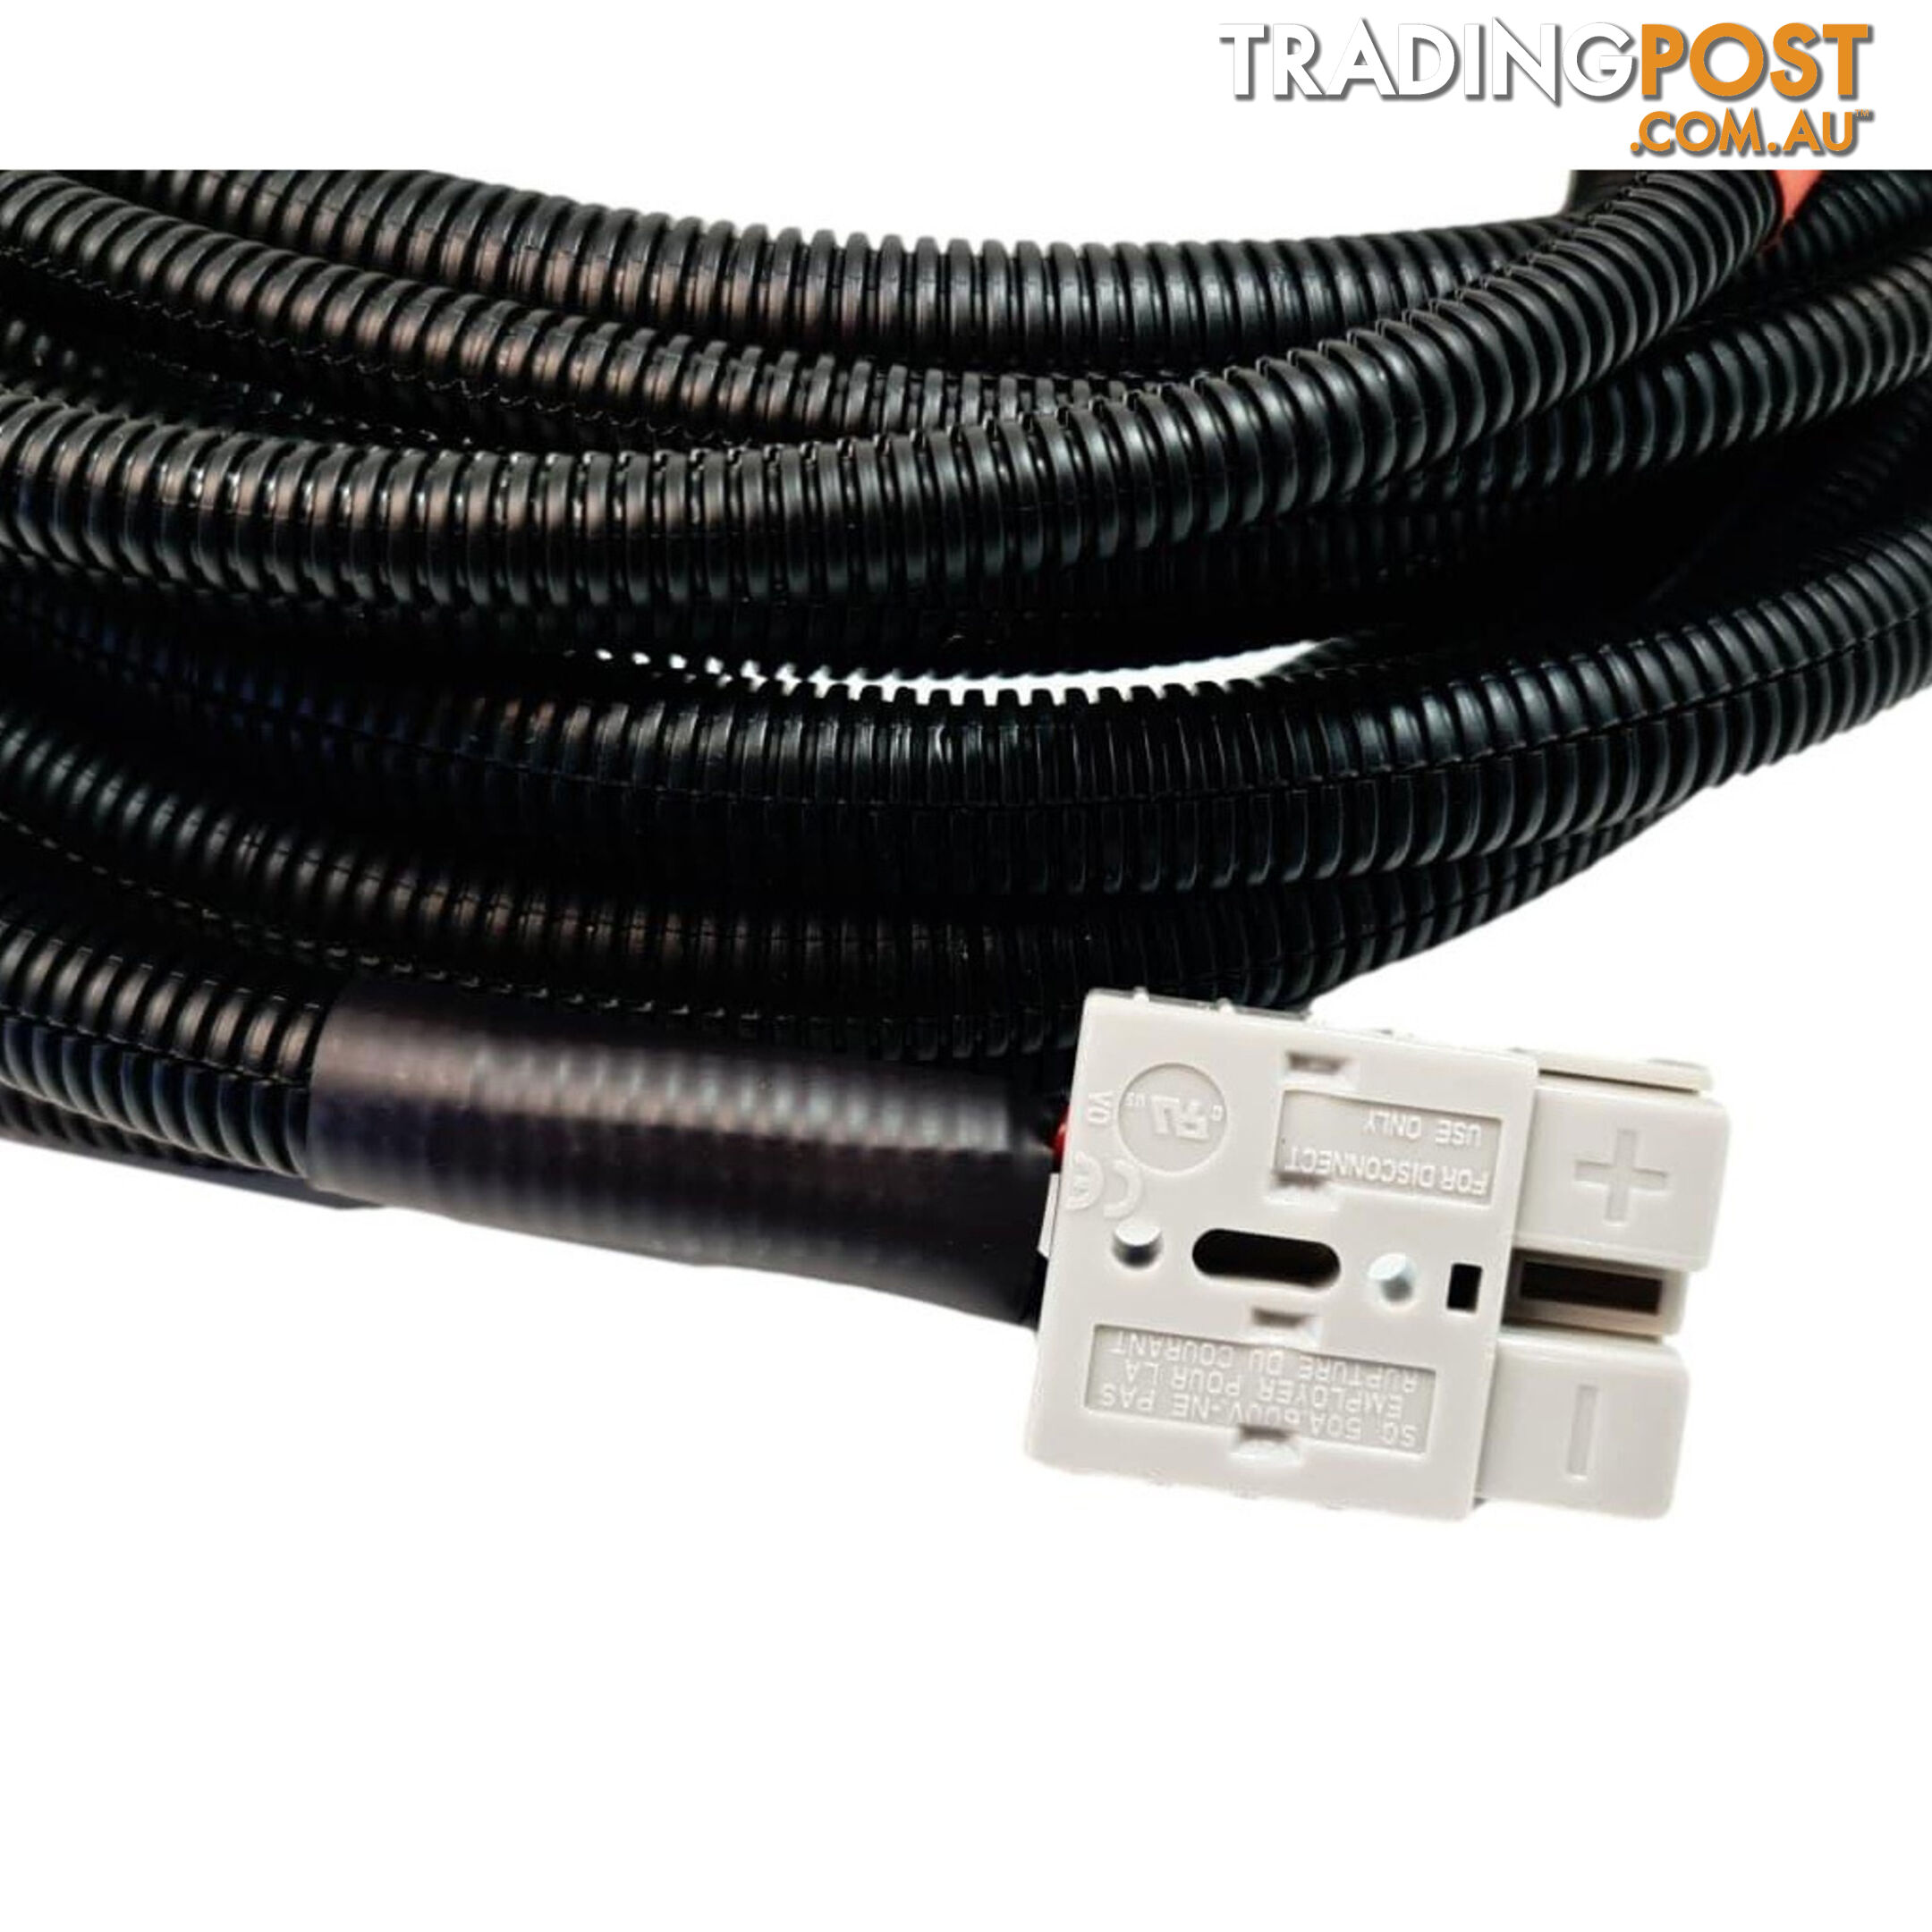 12/24v Lead 4 B S x 7m 50a Anderson, Midi Fuse and Holder Cable Lugs, Split Tube SKU - DC-13313